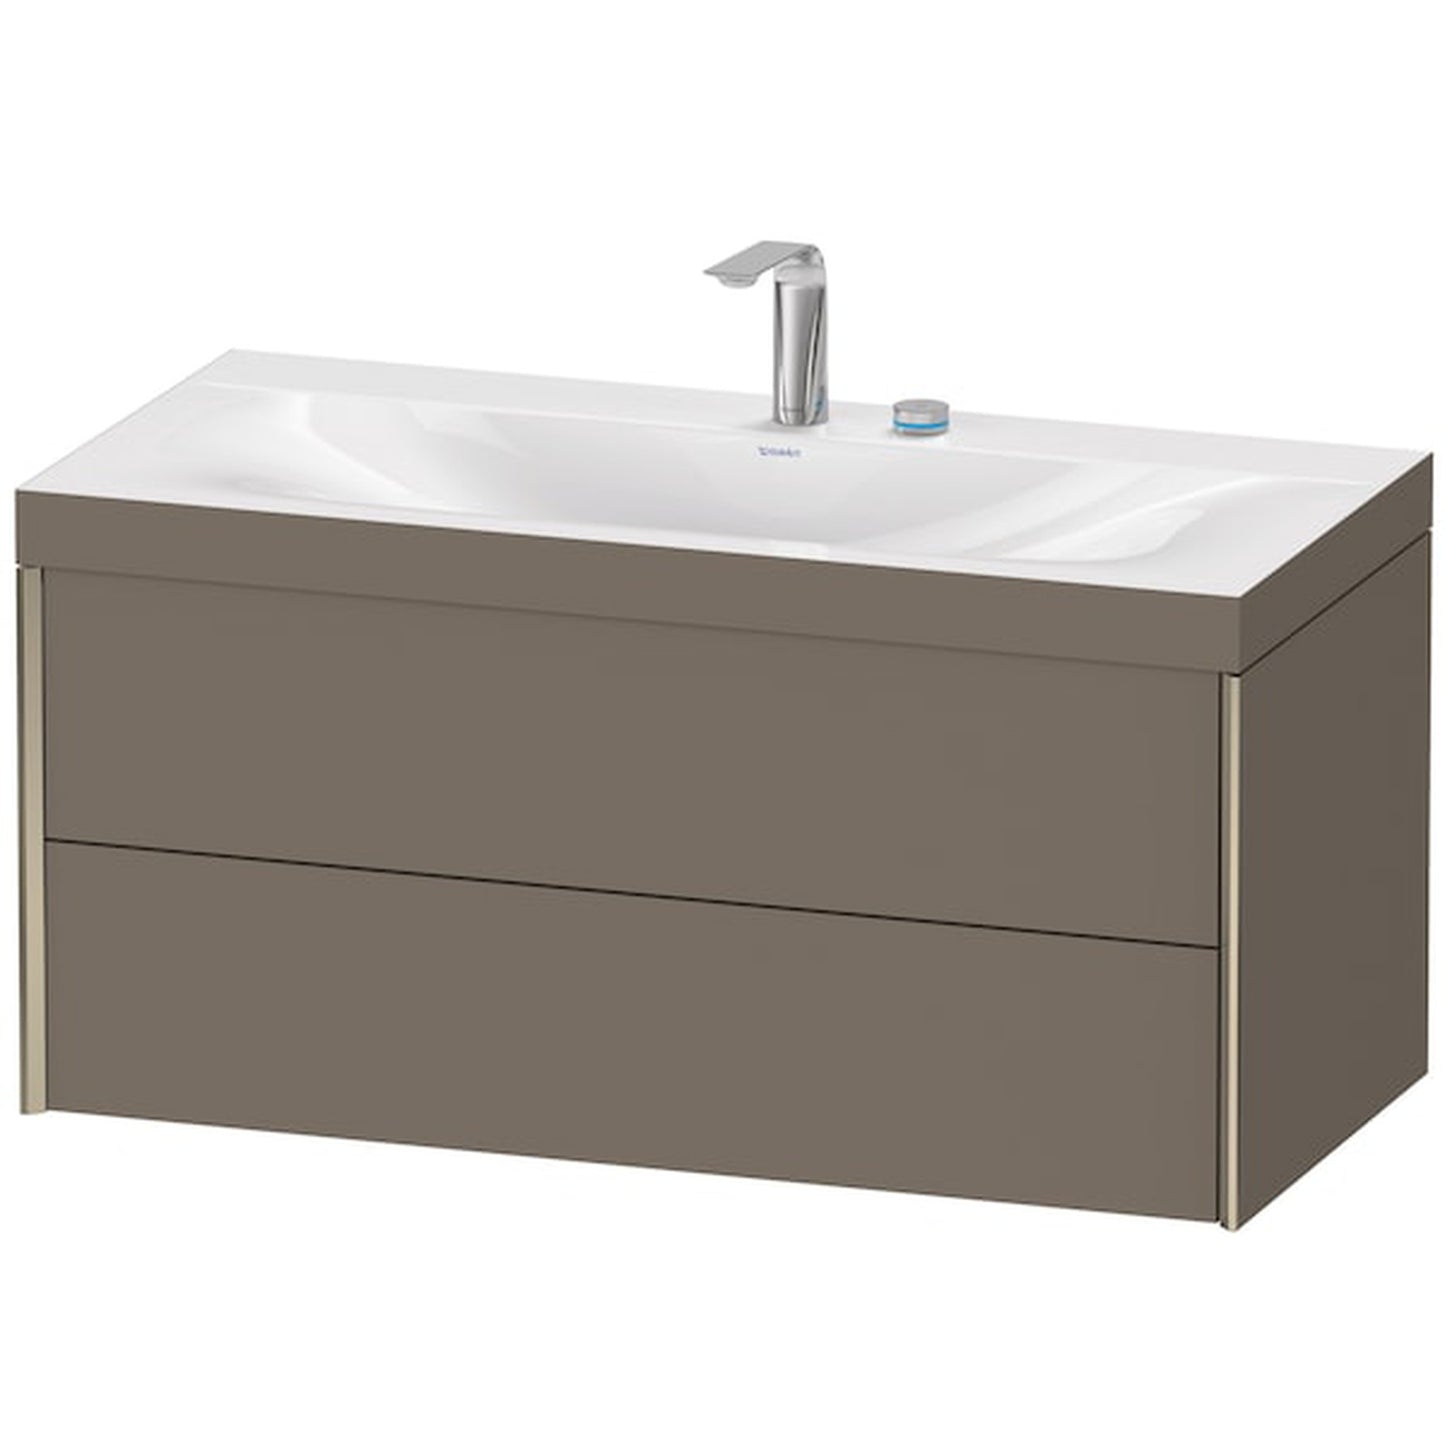 Duravit Xviu 39" x 20" x 19" Two Drawer C-Bonded Wall-Mount Vanity Kit With Two Tap Holes, Flannel Gray (XV4616EB190C)